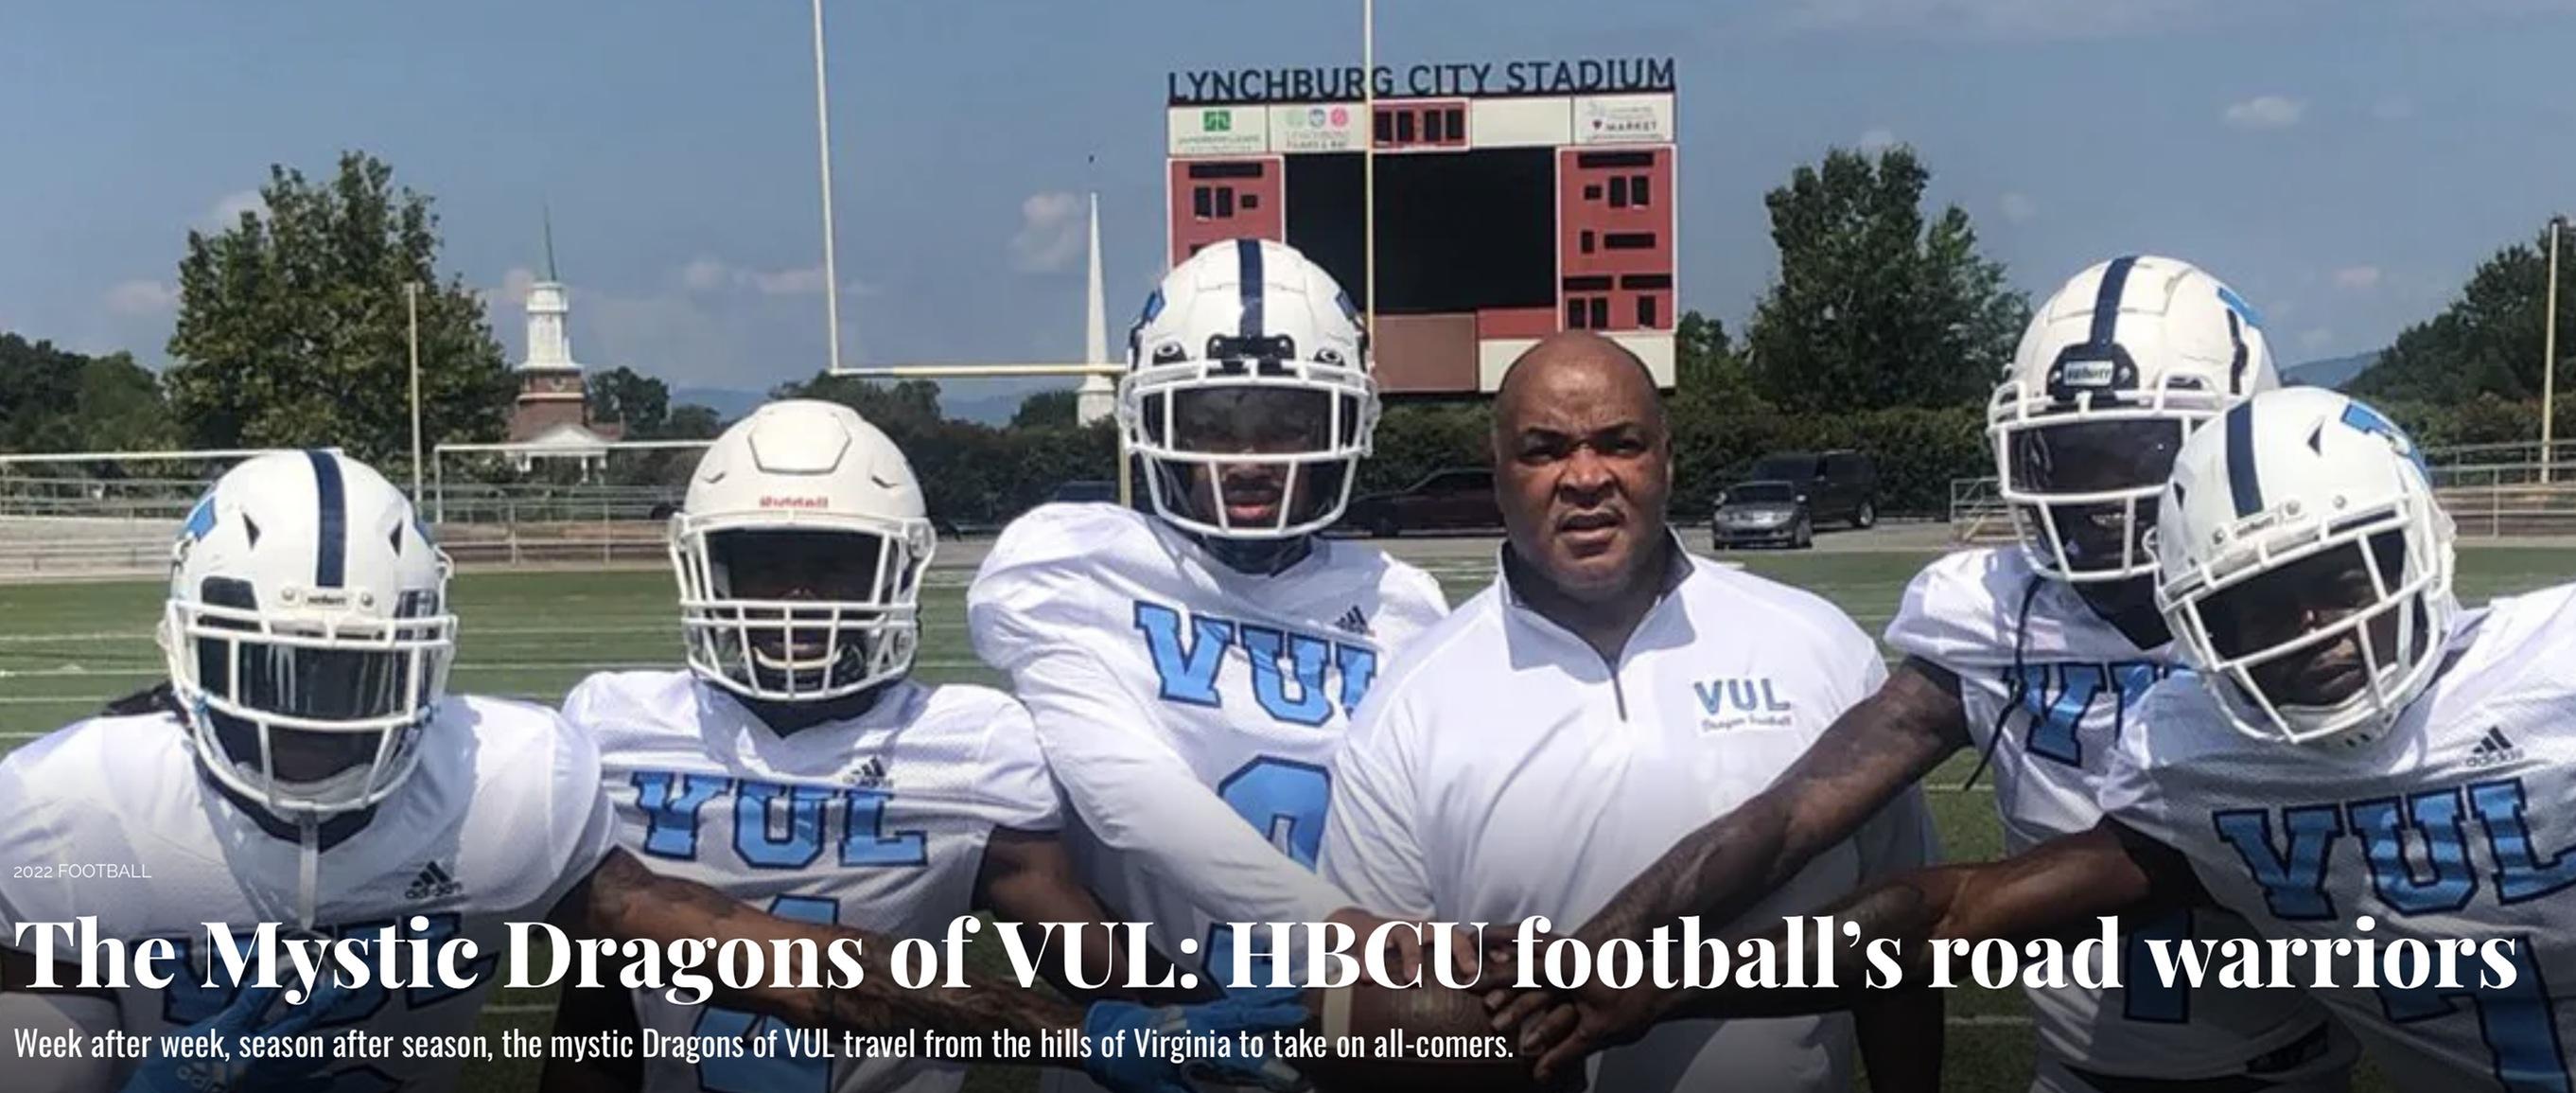 The Mystic Dragons of VUL: HBCU football&rsquo;s road warriors